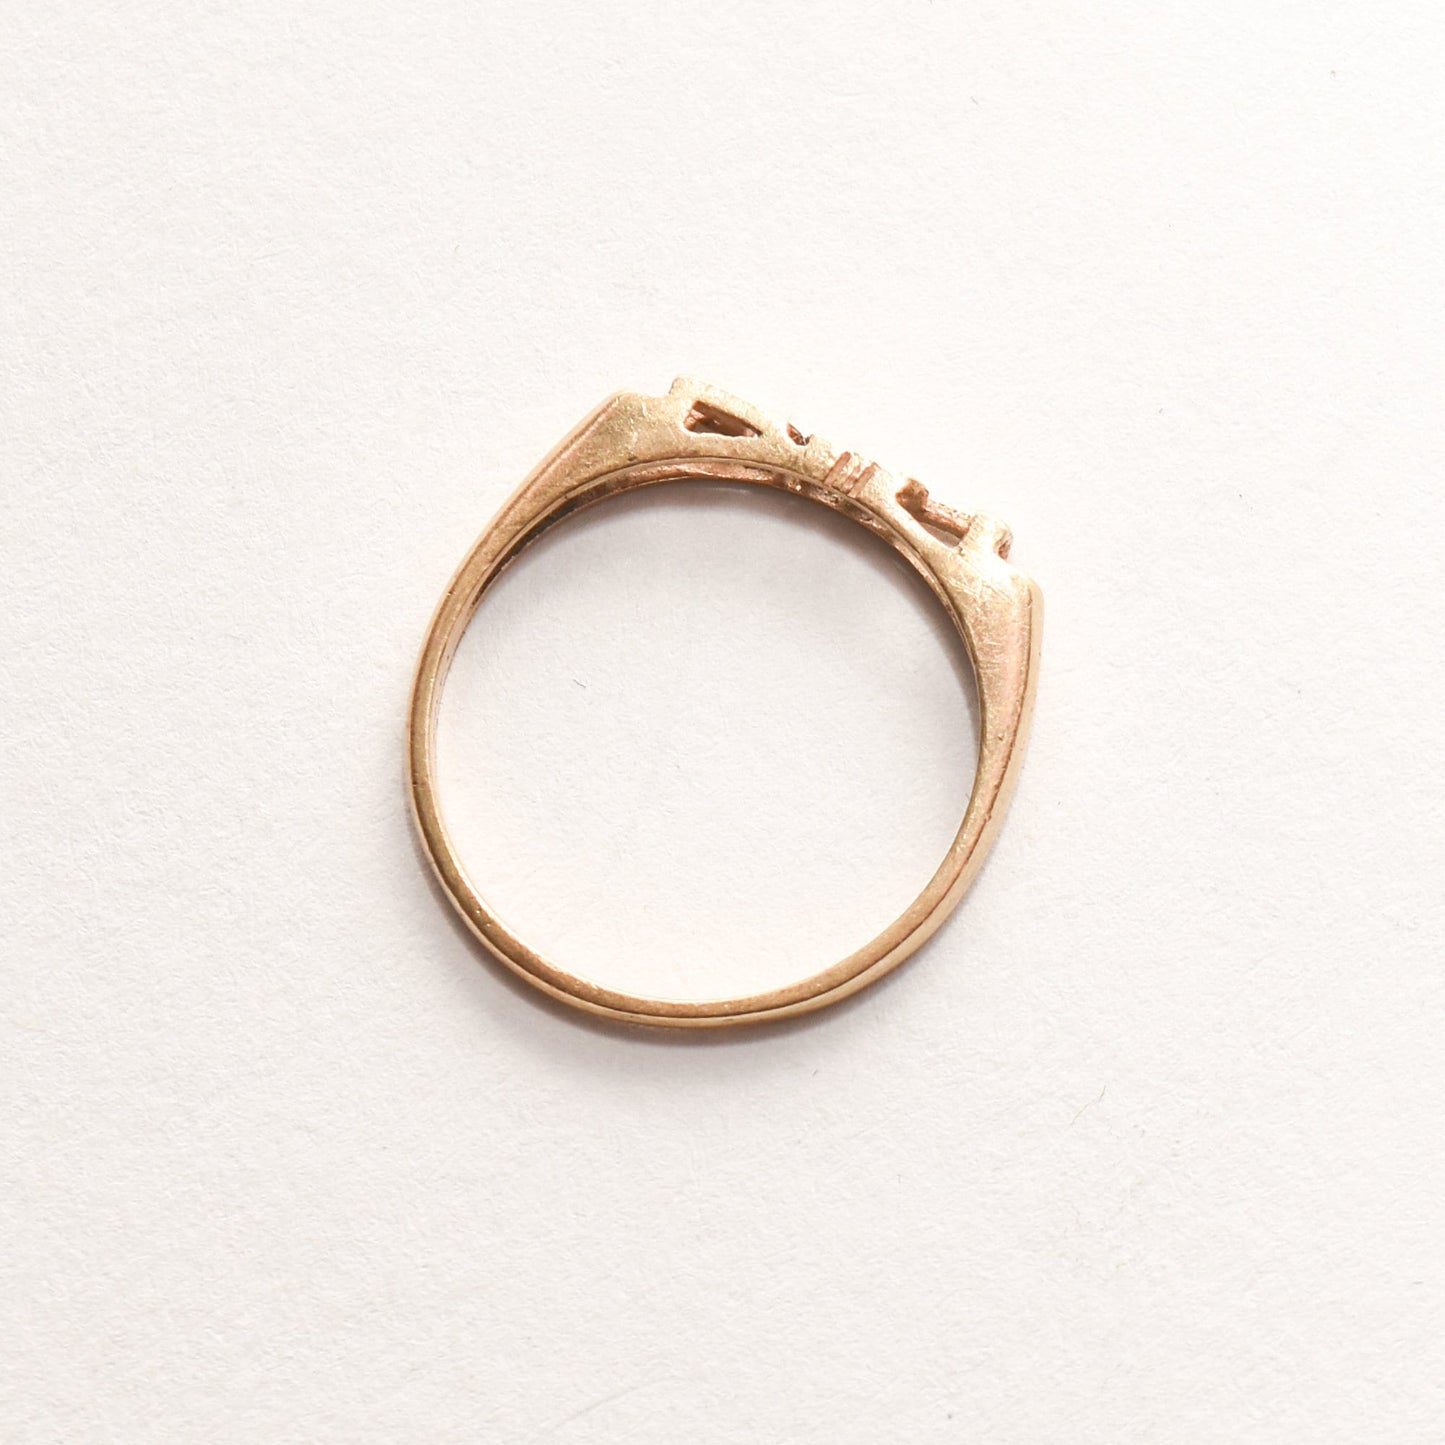 Minimalist 14K yellow gold 'LOVE' ring on a white background, cute stacking ring, perfect for Valentine's Day gift, size 6.75 US